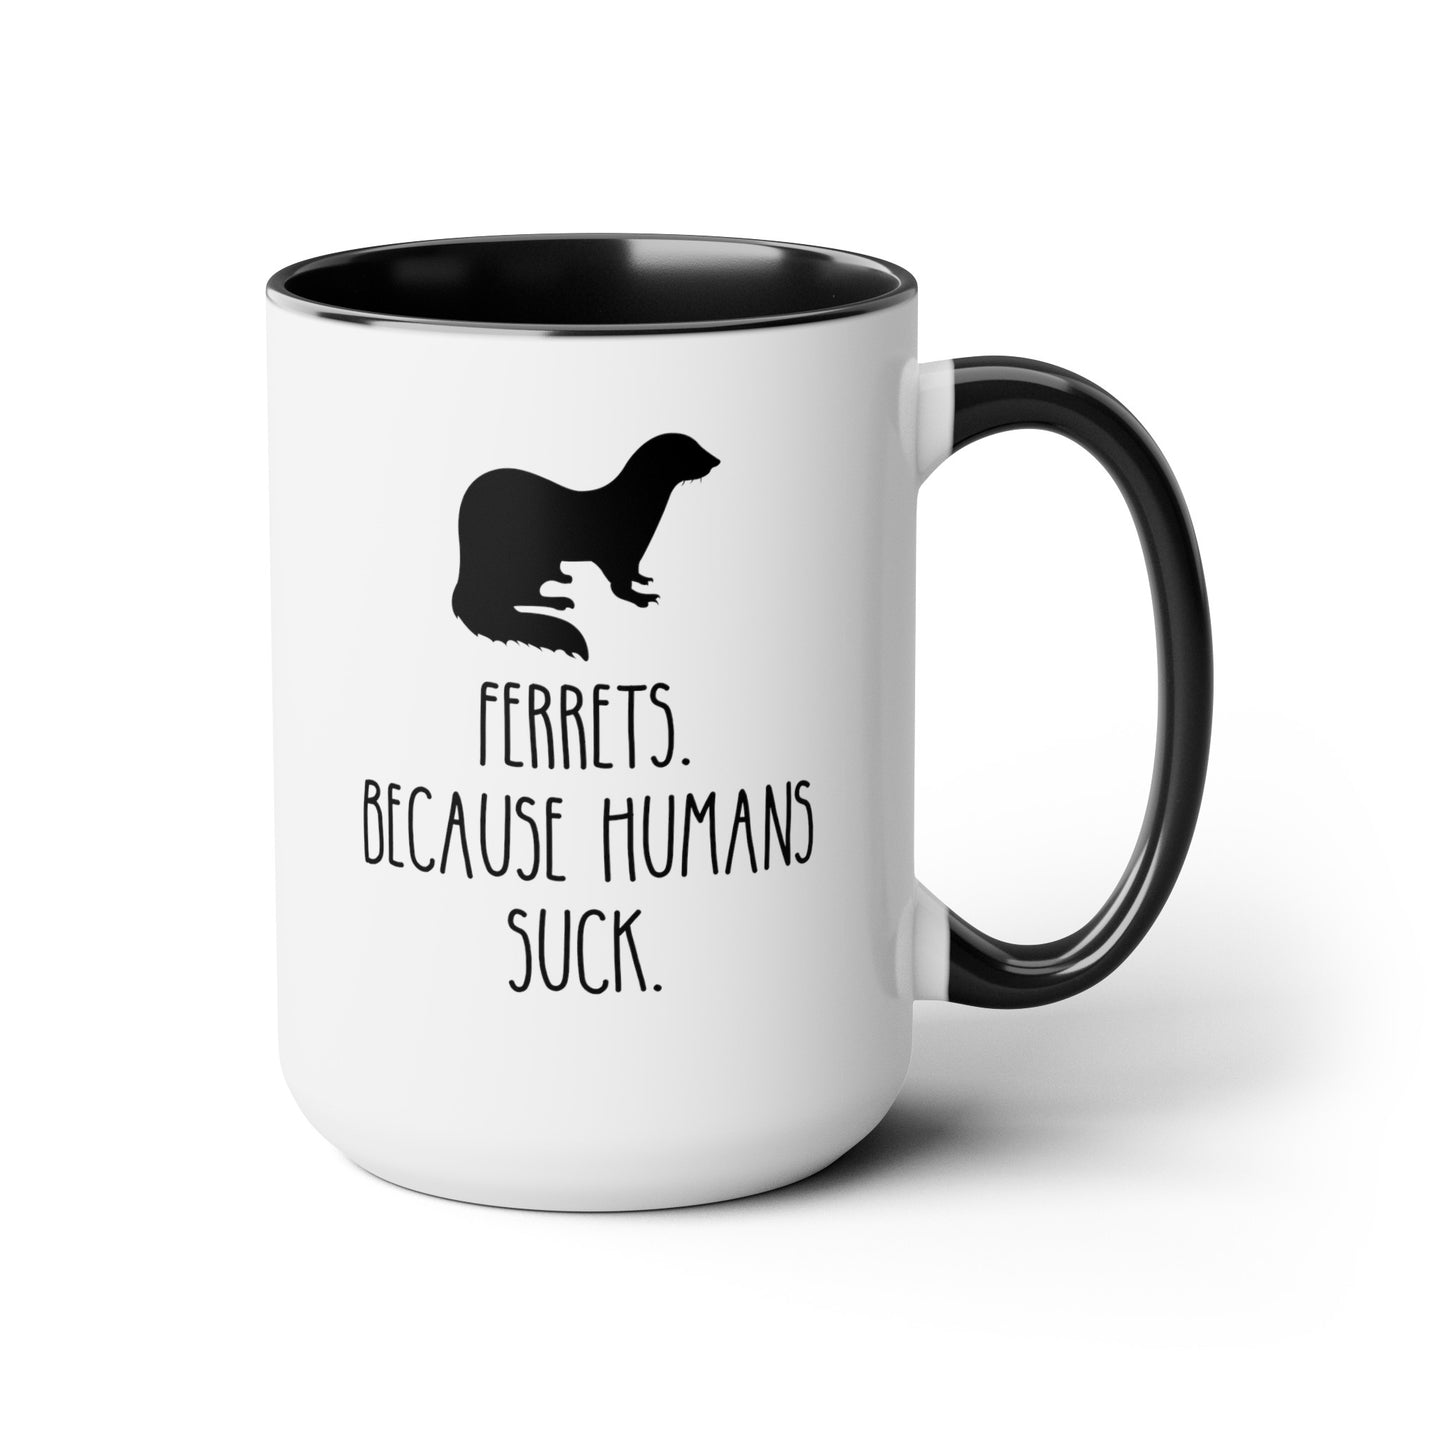 Ferrets Because Humans Suck 15oz white with black accent funny large coffee mug gift for cute ferret mom lover owner waveywares wavey wares wavywares wavy wares